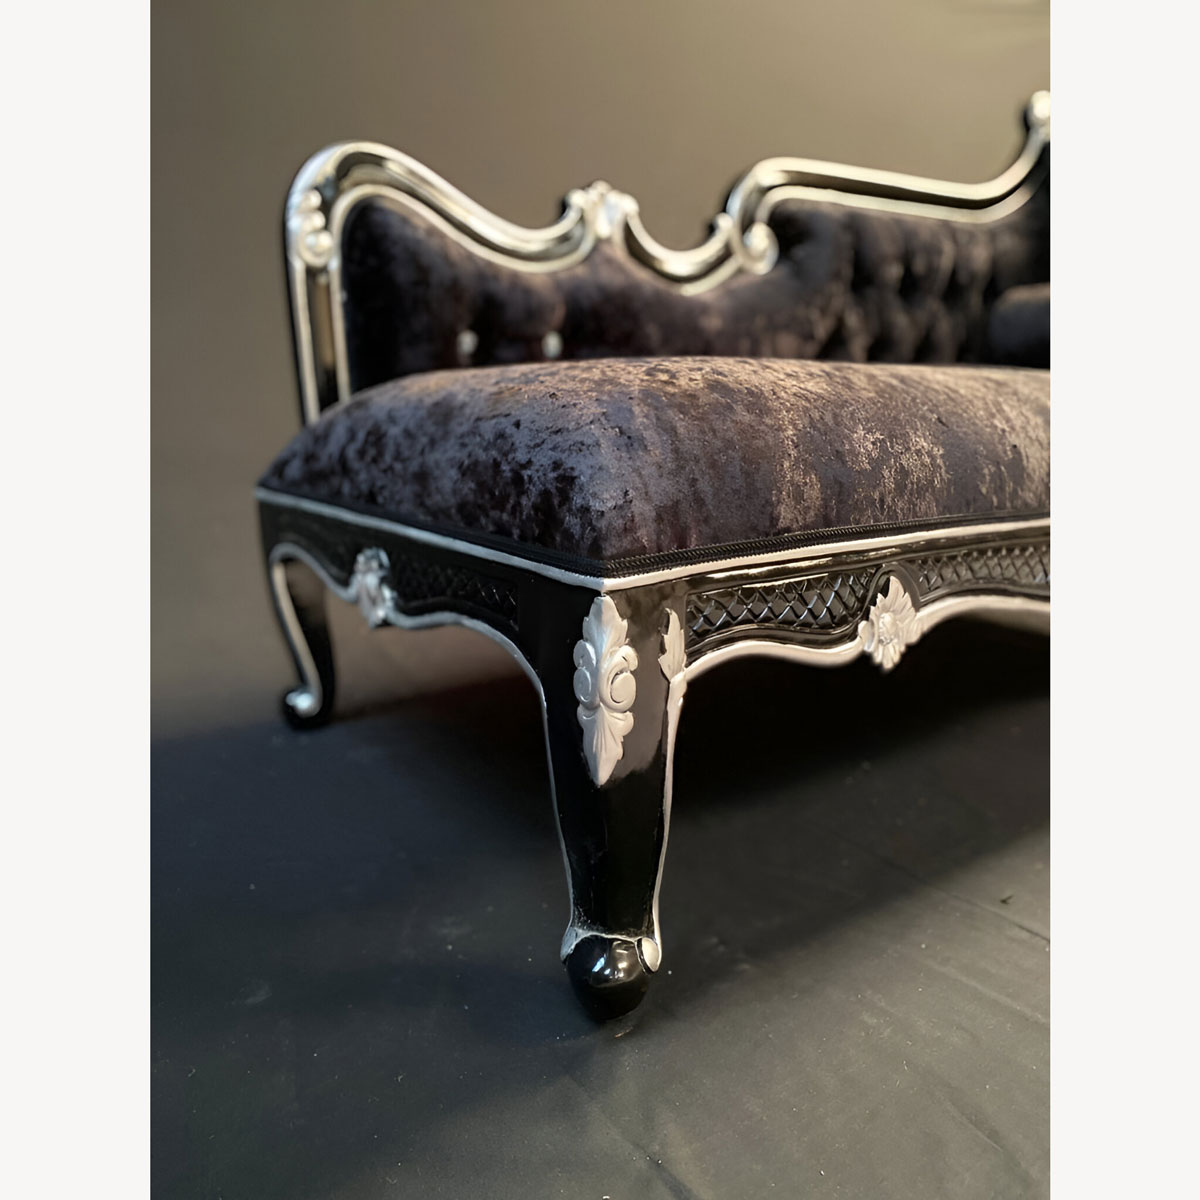 Armani Chaise Longue In Black With Silver Detailing And Blackberry Crushed Velvet Crystal Buttons Smaller Version 6 - Hampshire Barn Interiors - Armani Chaise Longue In Black With Silver Detailing And Blackberry Crushed Velvet Crystal Buttons Smaller Version -